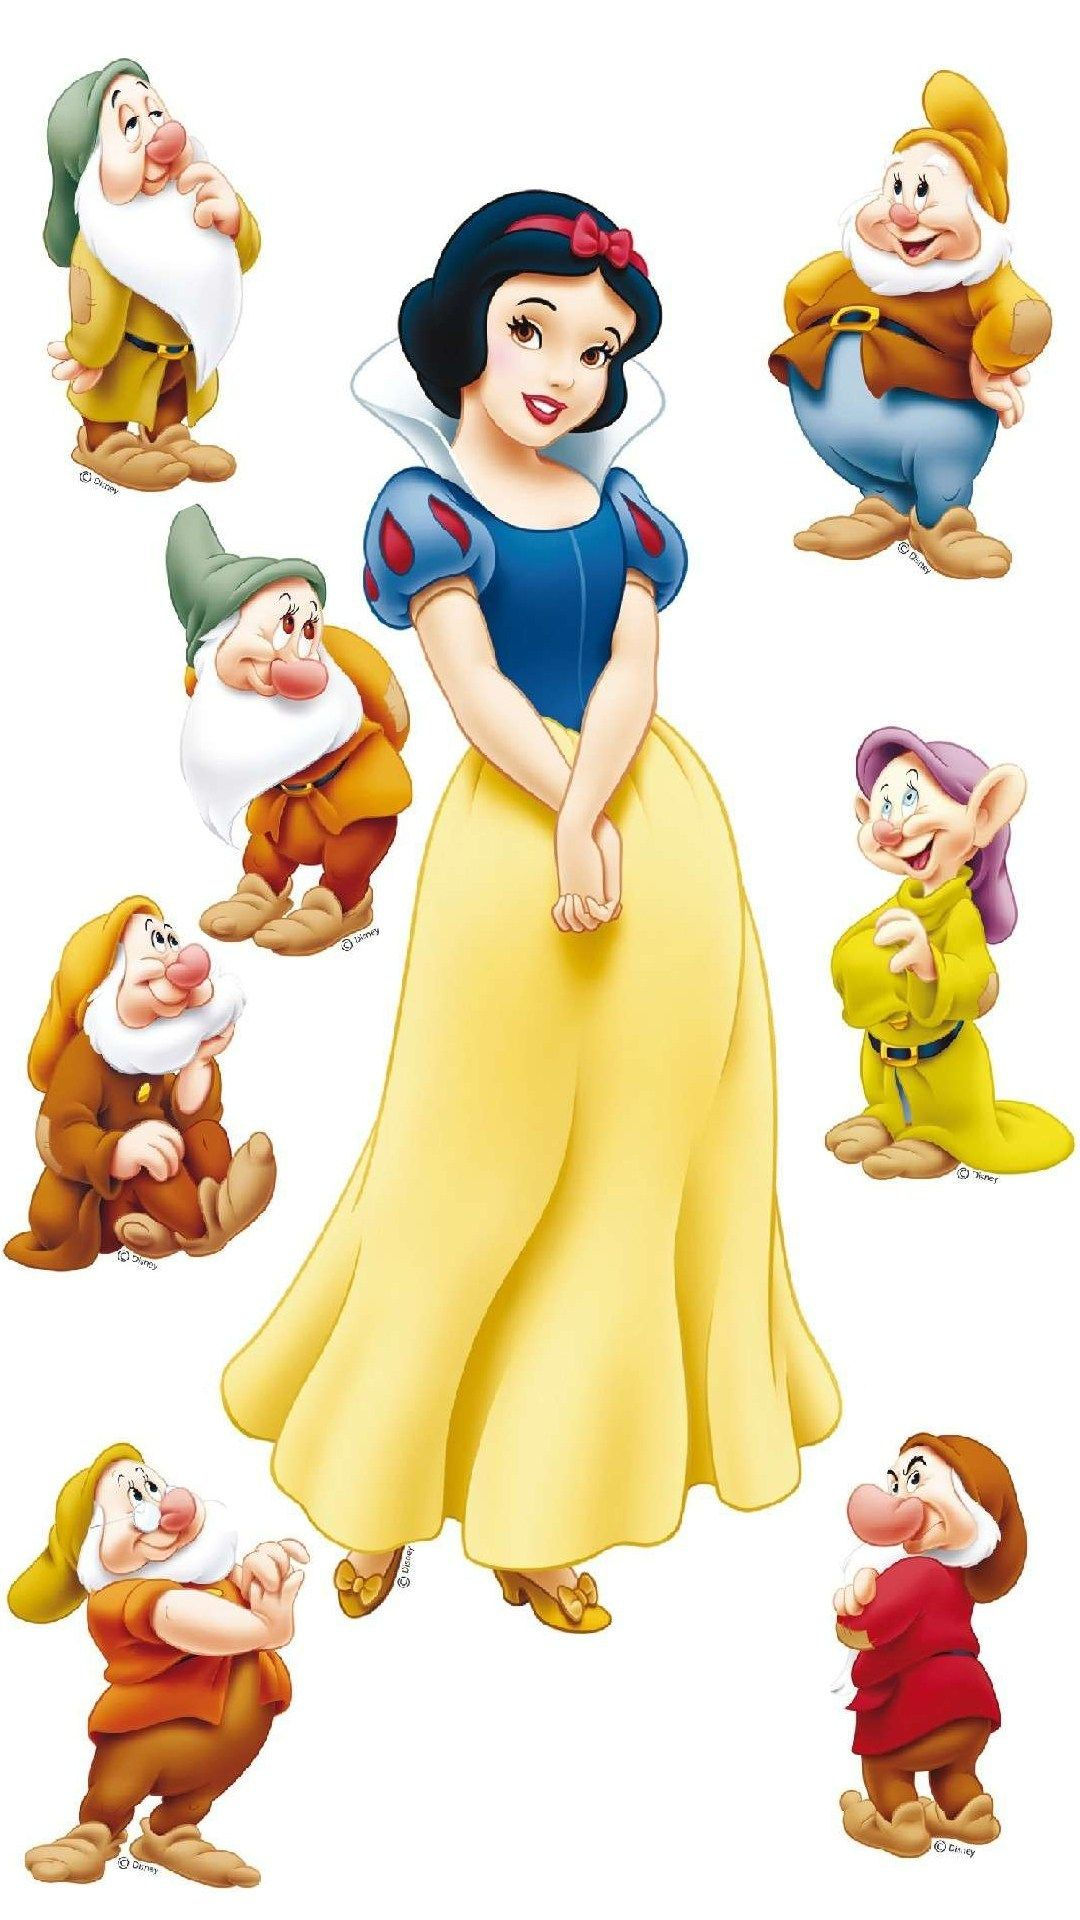 1080x1920 A Picture Of Snow White and The Seven Dwarfs for Android Wallpaper HD Wallpapers | Wallpapers Download | High Resolution Wallpapers | Snow white pictures, Snow white, Snow white 7 dwarfs